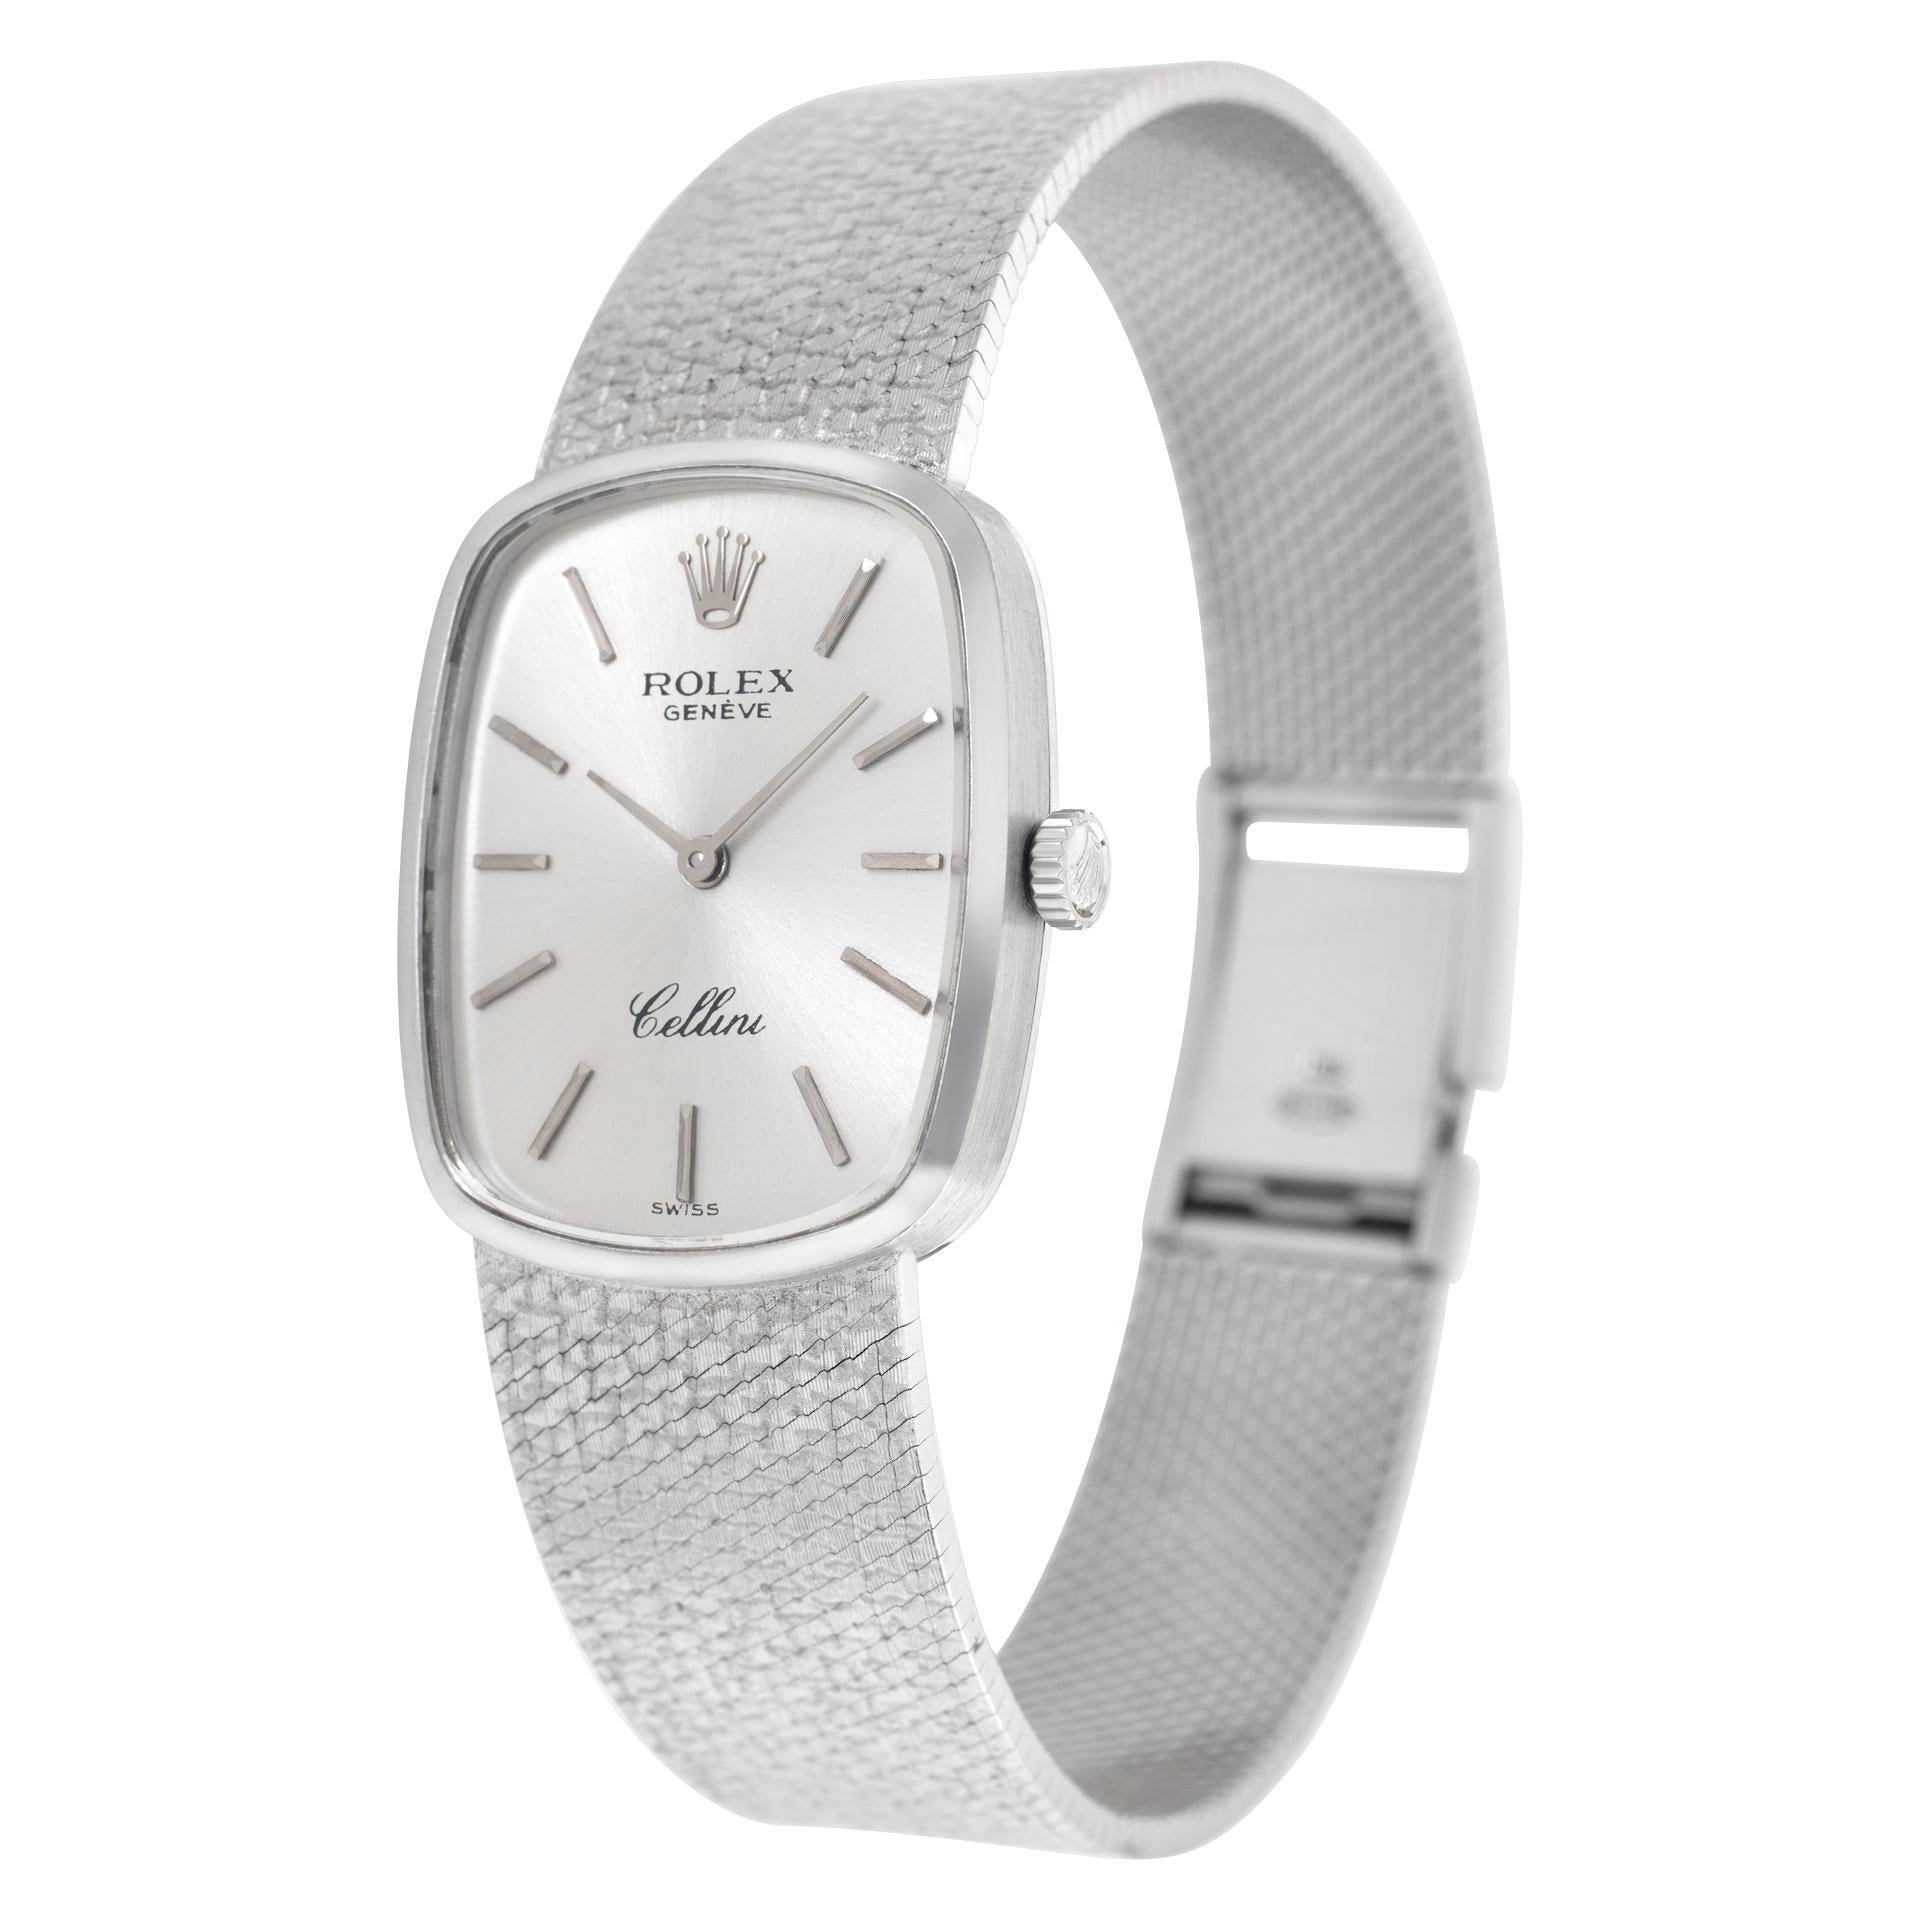 Rolex Cellini in 18k white gold. Manual. 23 mm case size. Fits 7.25 inches wrist.**Bank wire only at this price** Circa 1975 Fine Pre-owned Rolex Watch. Certified preowned Vintage Rolex Cellini watch is made out of white gold on a 18k White Gold